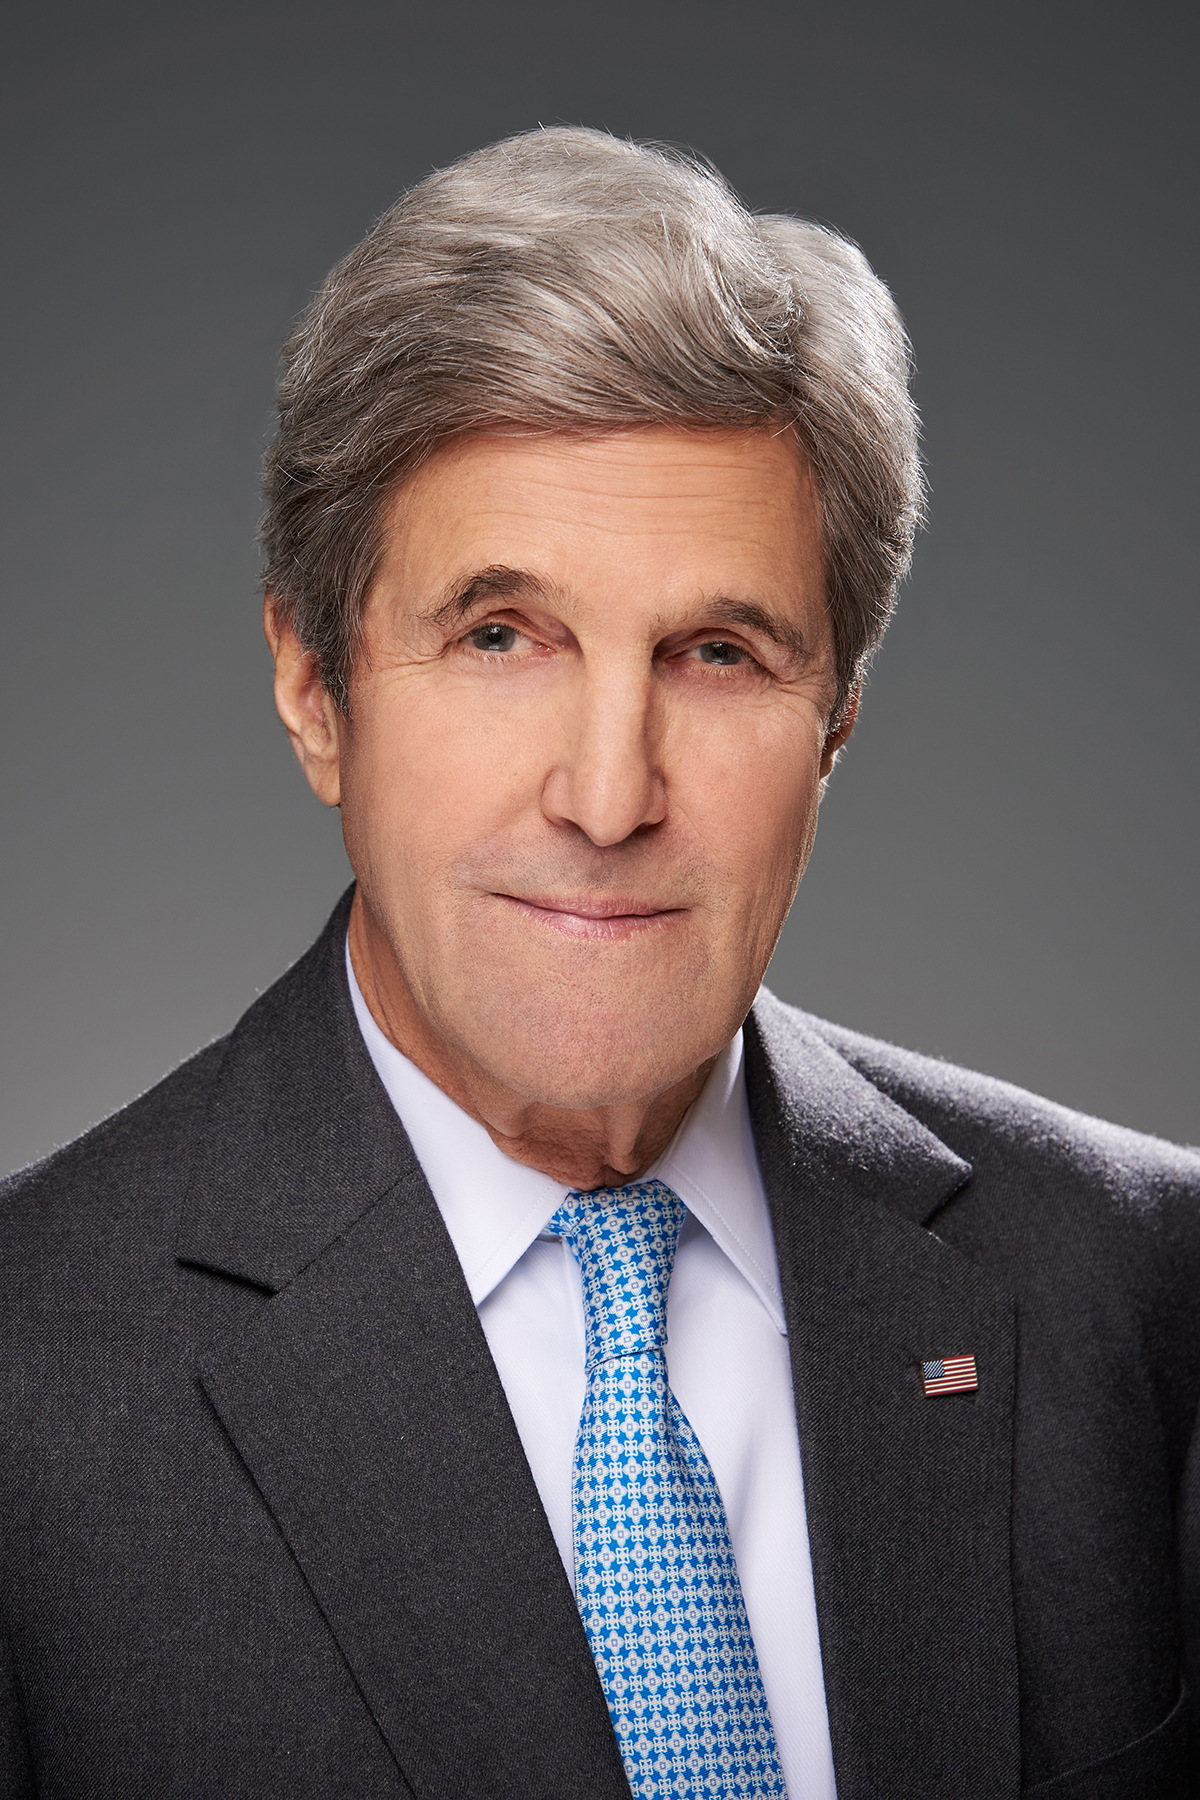 His Excellency Dr. Anwar Mohammed Gargash, UAE Minister Of State For Foreign Affairs, And Former US Secretary Of State John Kerry To Speak At NYU Abu Dhabi’s Fifth Graduation Ceremony